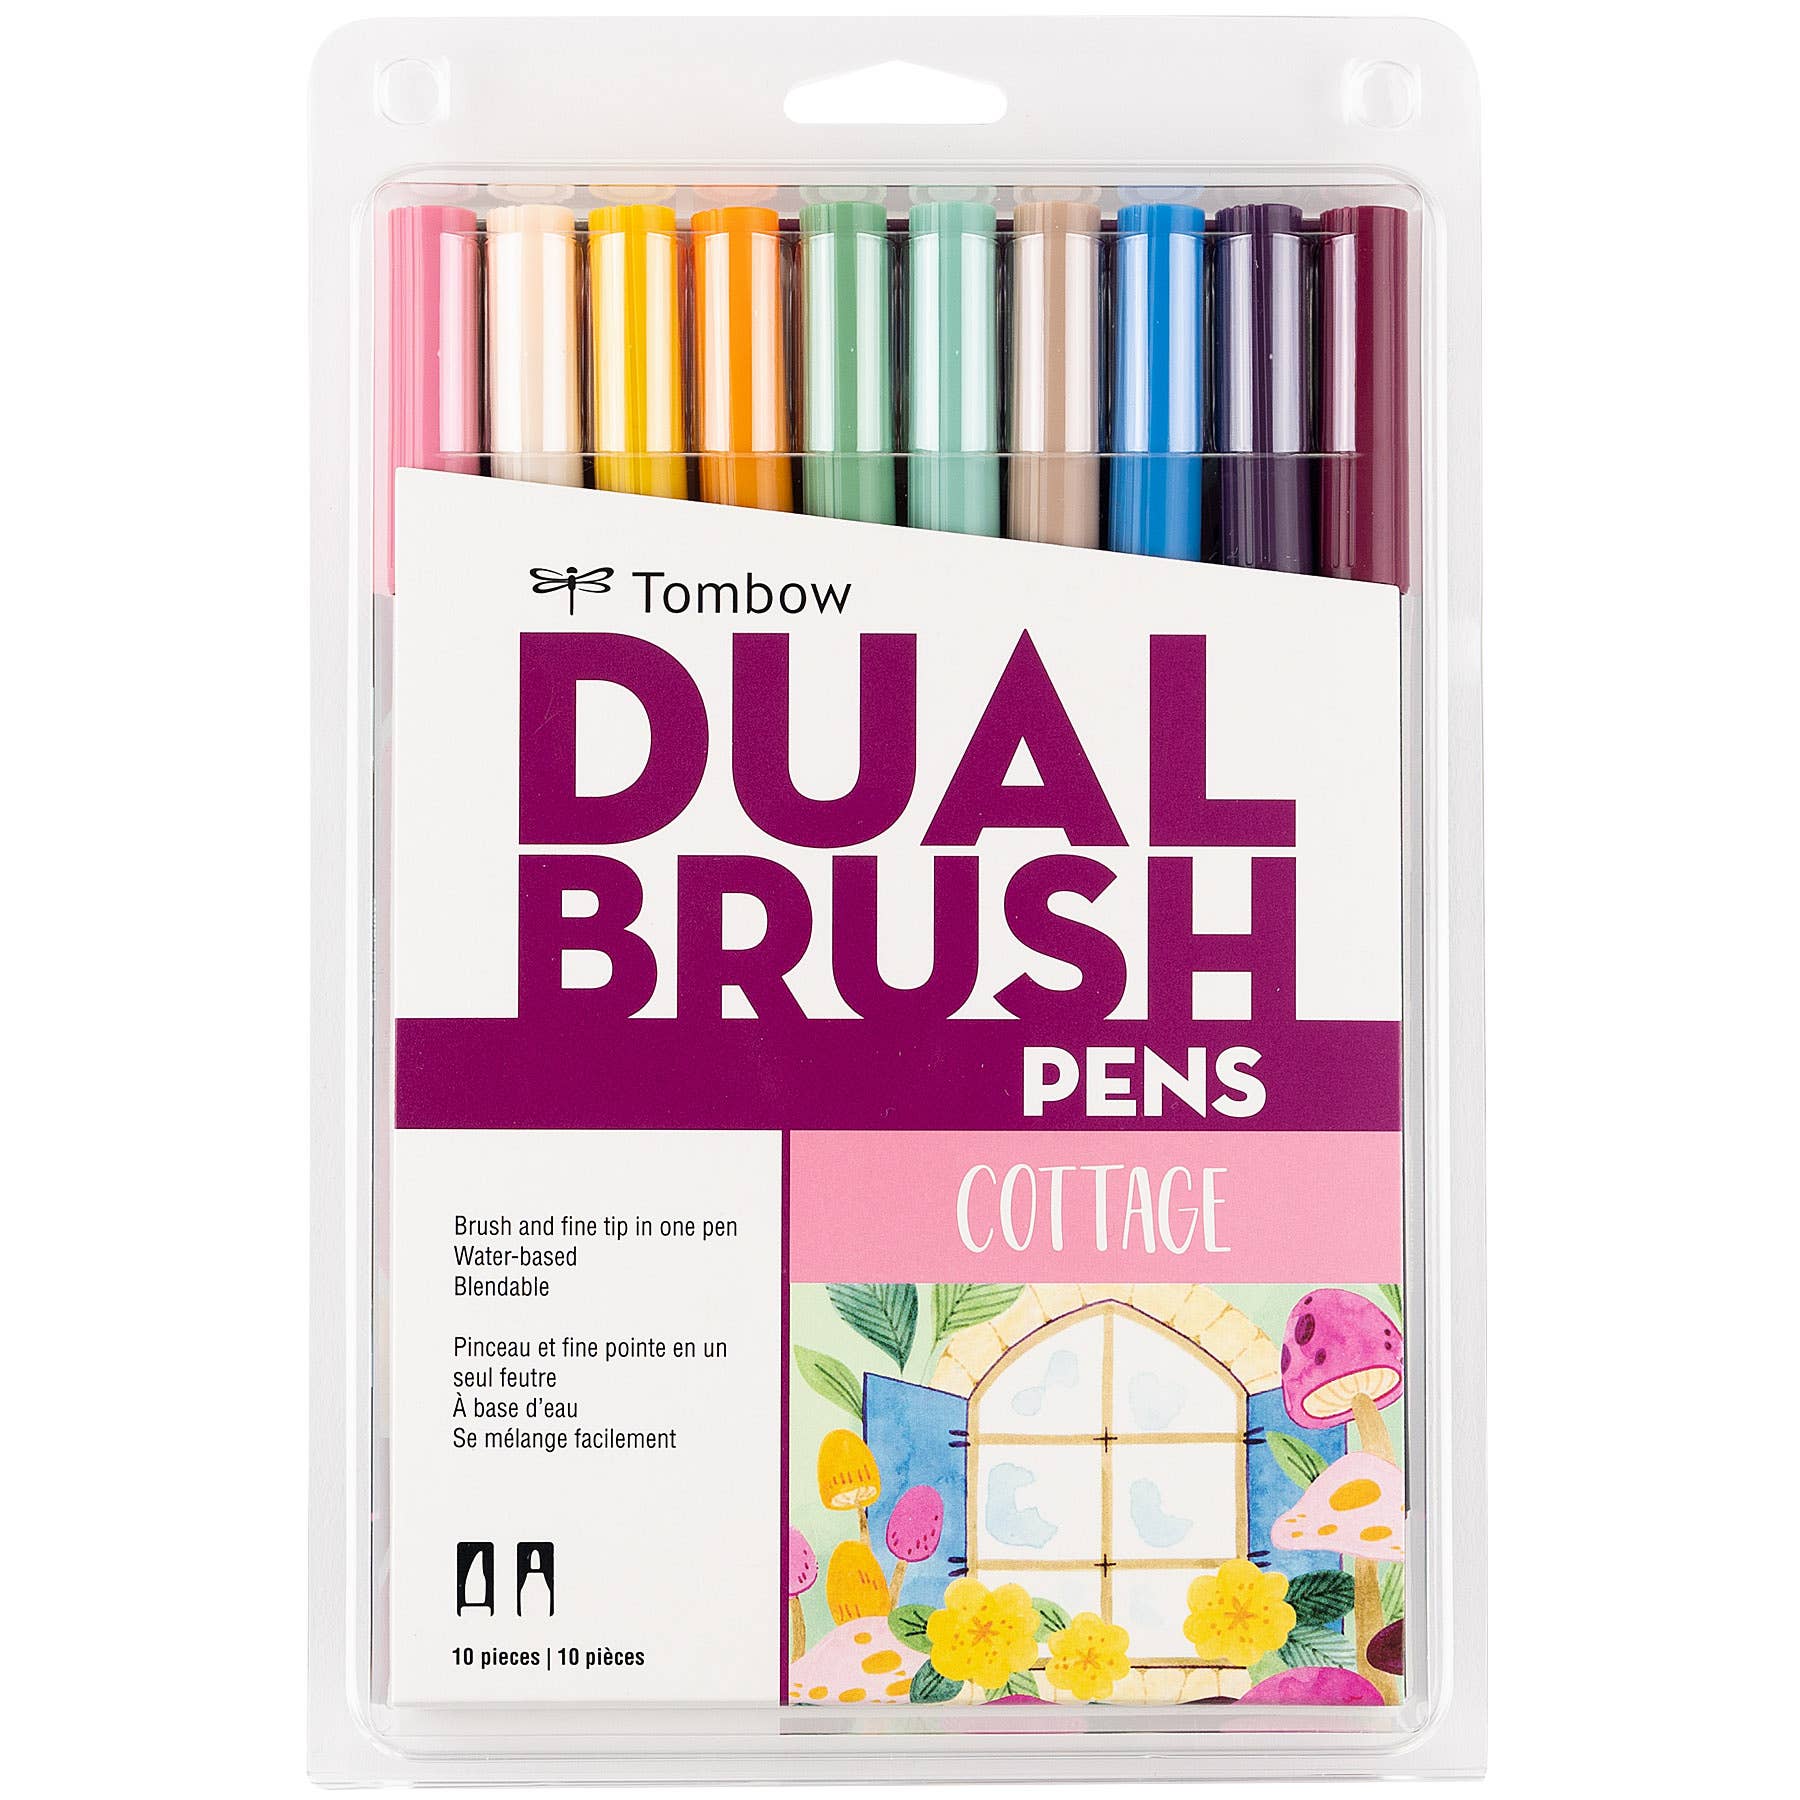 Dual Brush Pen Art Markers: Cottage - 10-Pack